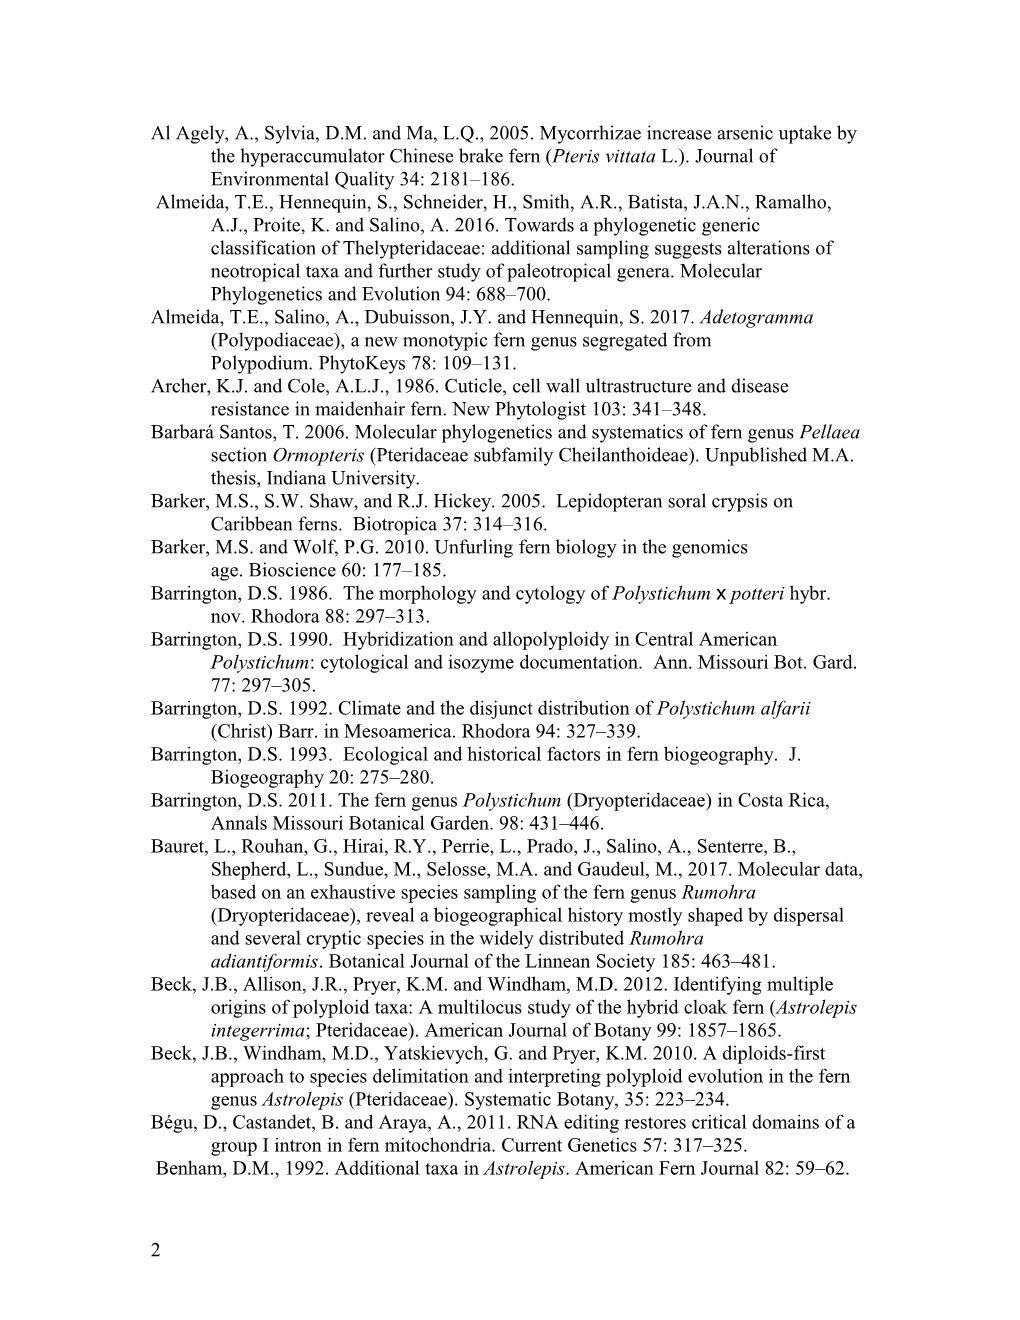 PLANT BIOLOGY 209 BIBLIOGRAPHY for 2008